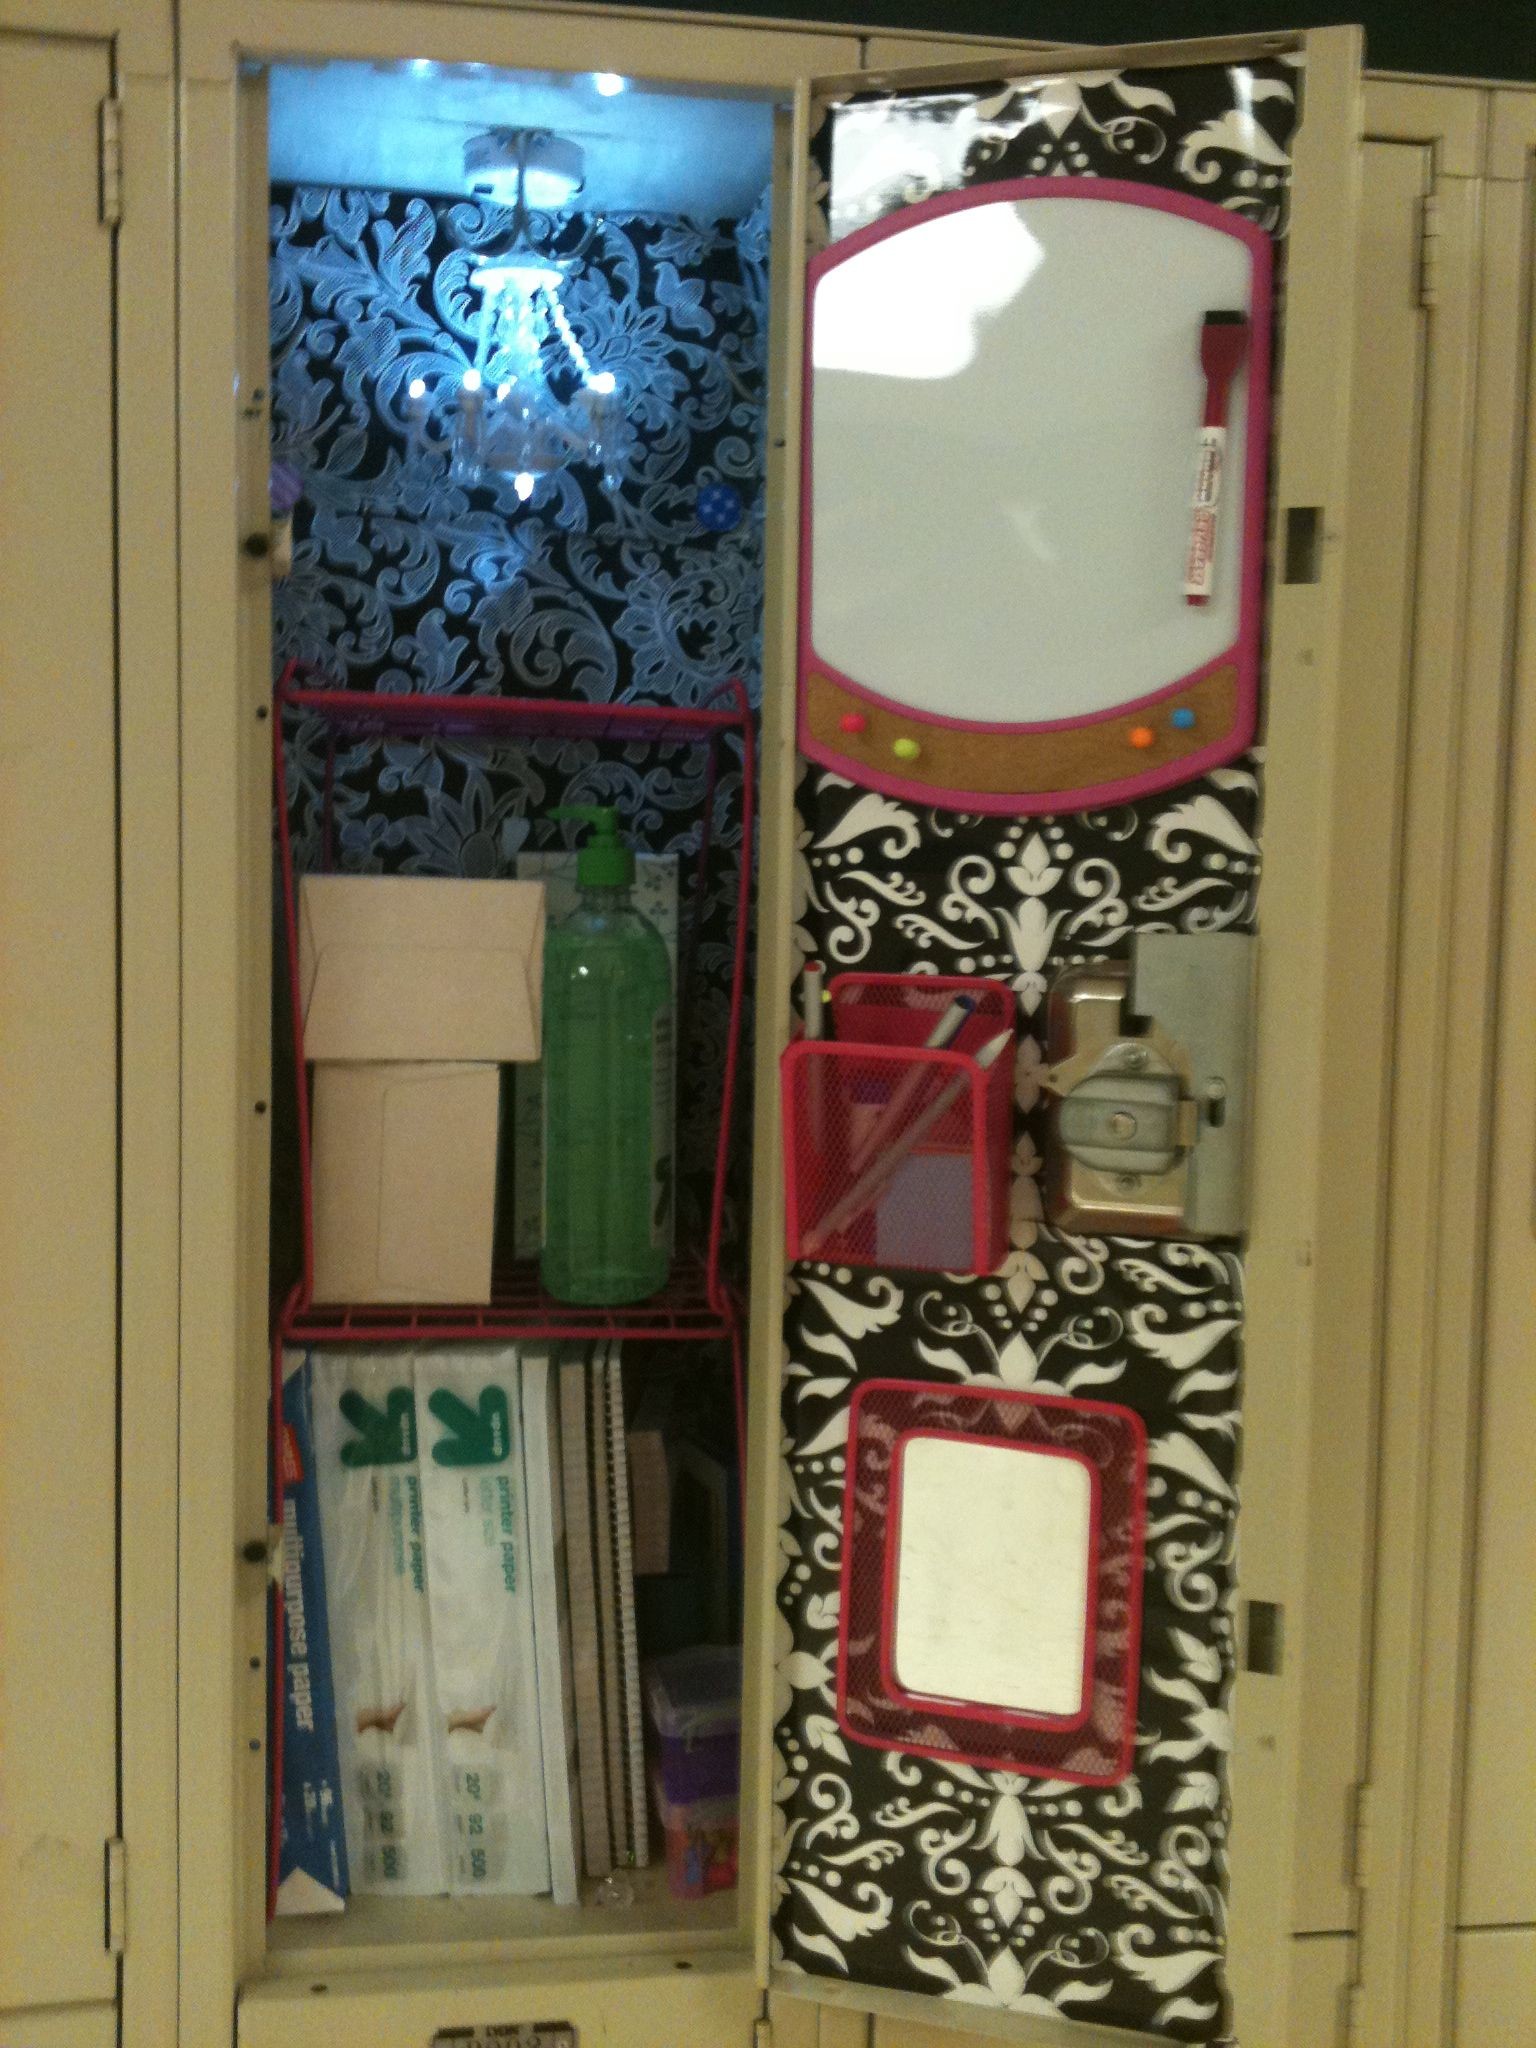 1536x2048 Locker decorated. Used magnet wallpaper for door. The kit did not include  enough for